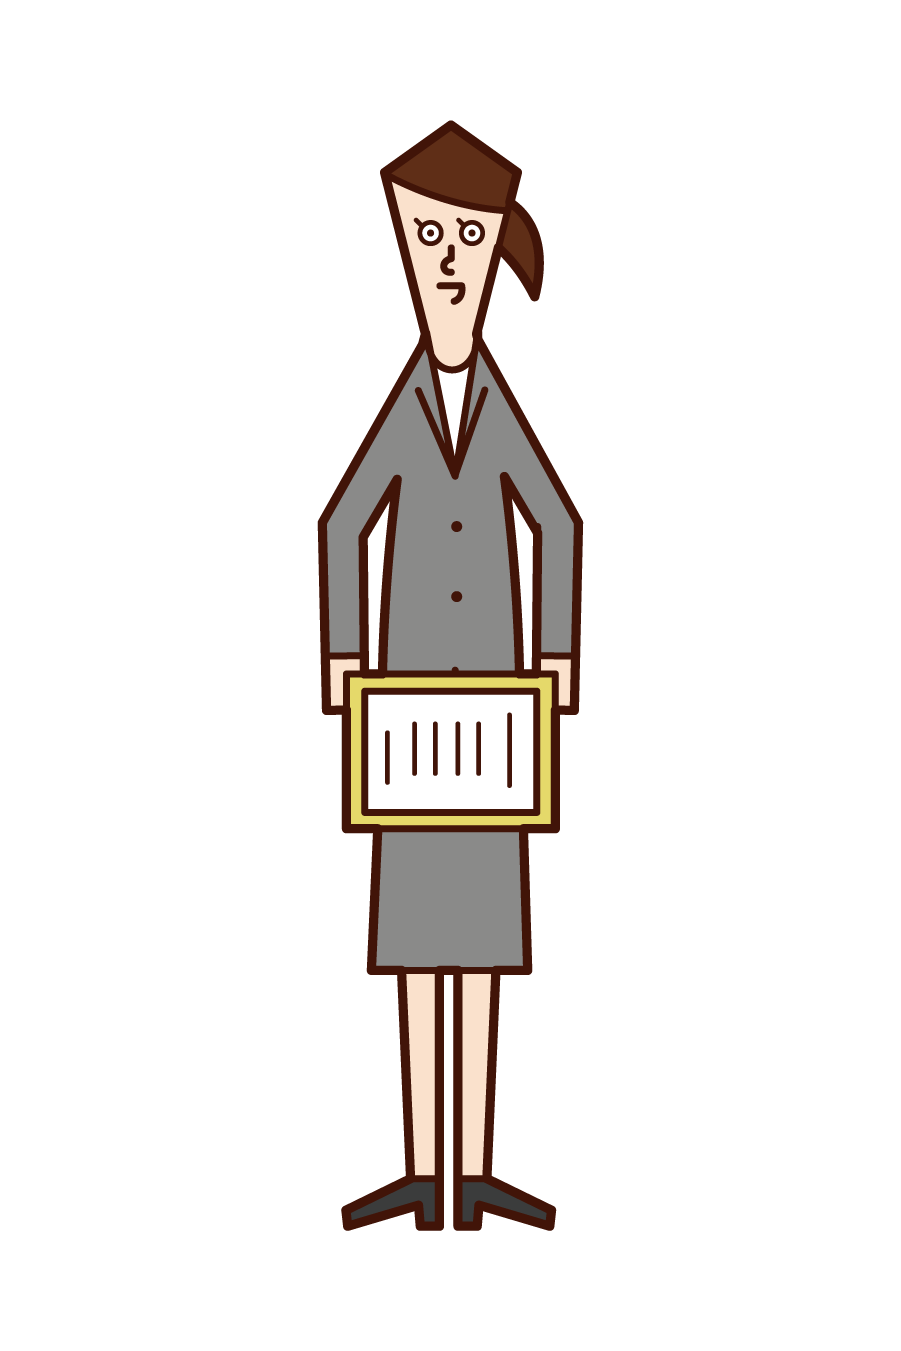 Illustration of the person (woman) who submits her resignation